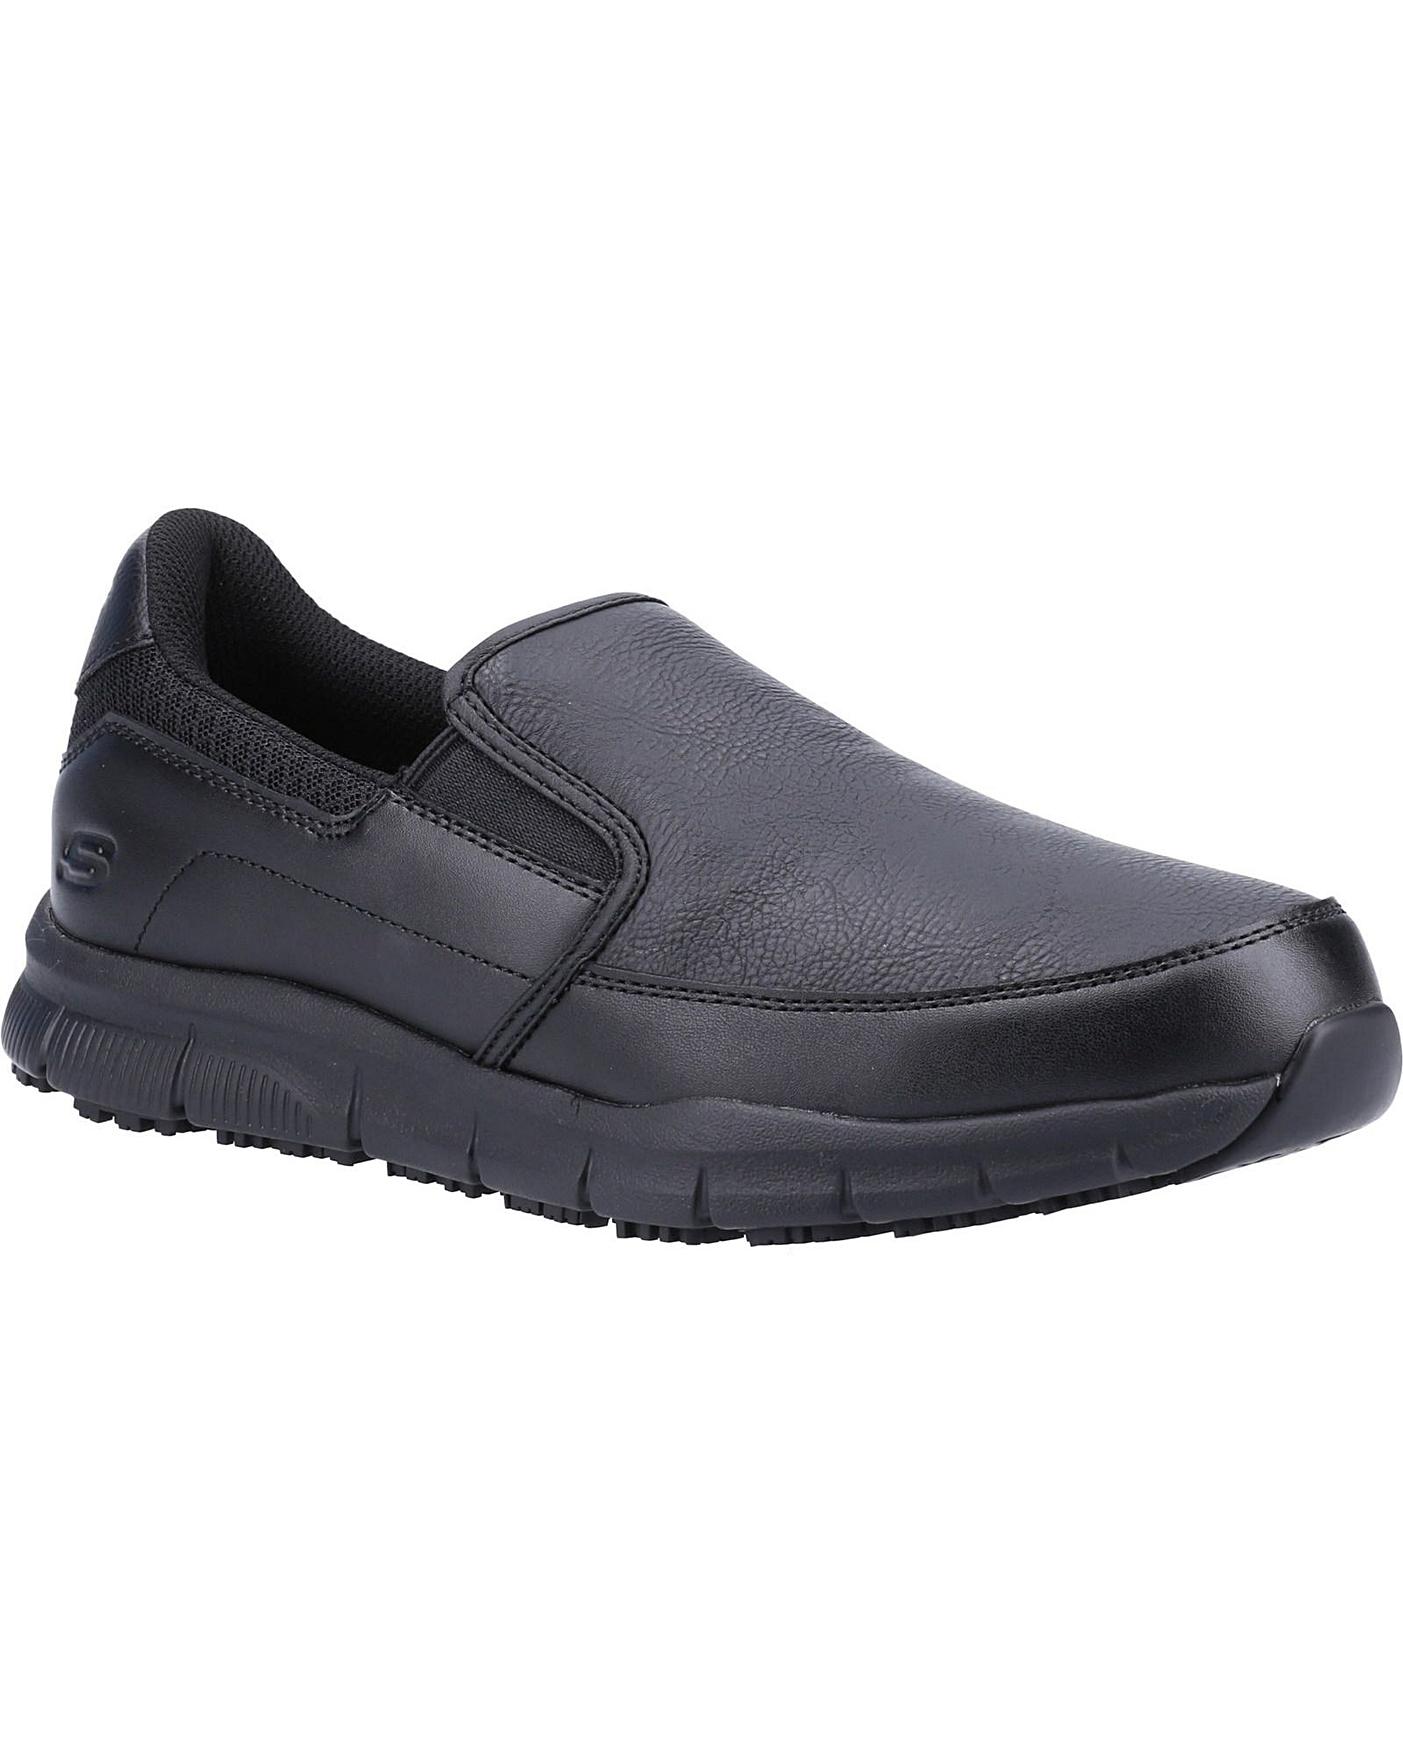 Skechers Nampa Groton Occupational Shoes | J D Williams